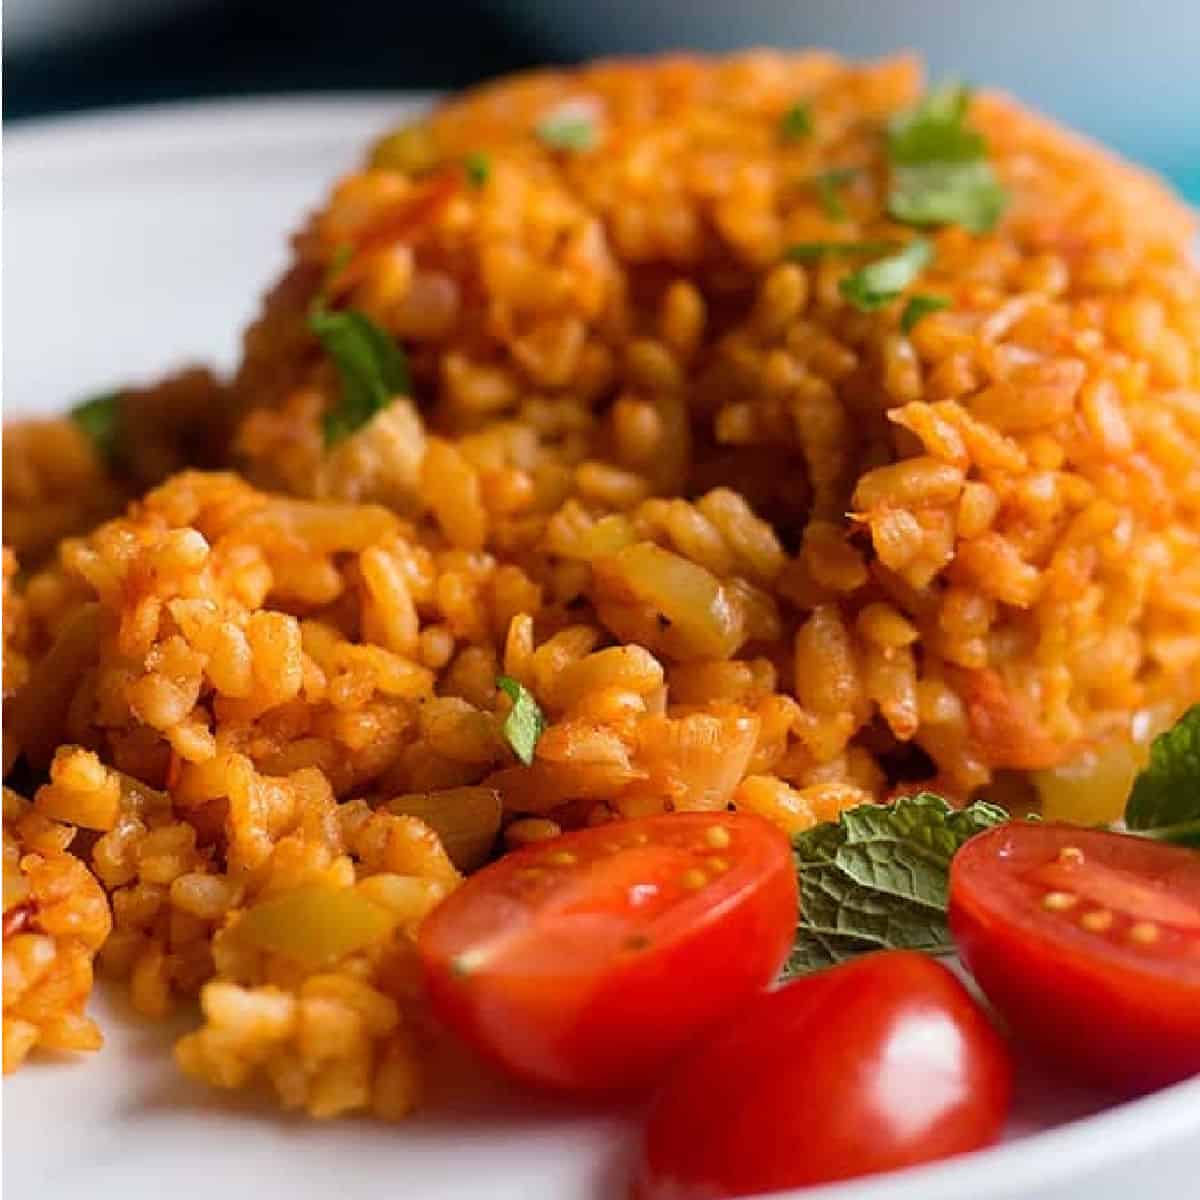 Turkish style bulgur pilaf is a classic hearty and healthy side dish dish that is very easy to make. It's a great alternative to rice and can be served with many dishes. 